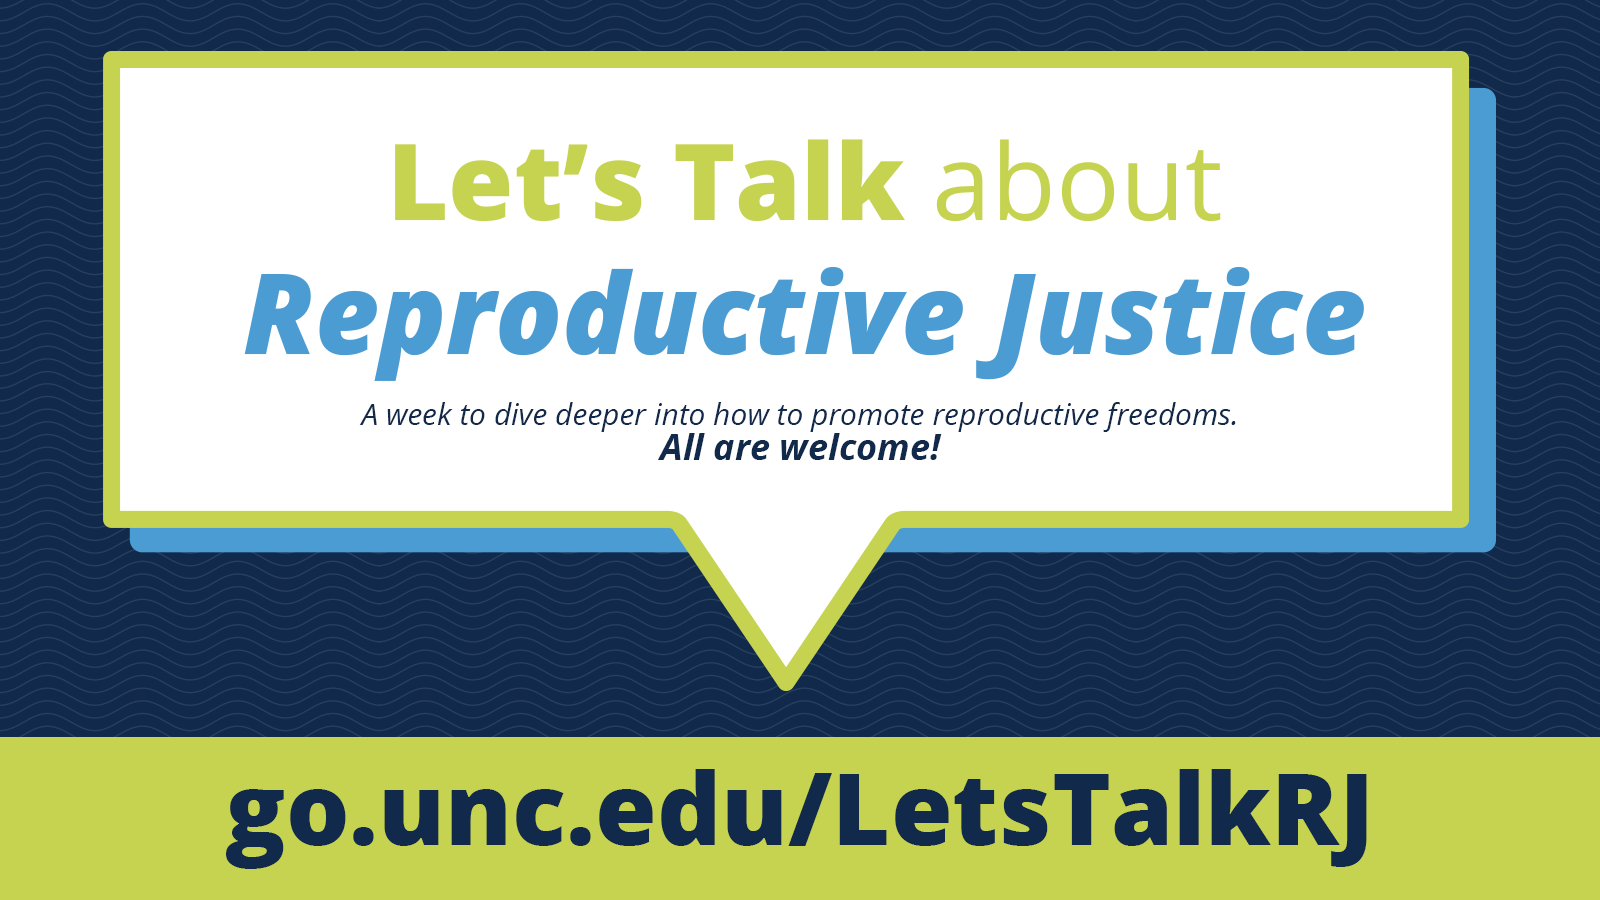 A white speech bubble on a navy background says "Let's talk about reproductive justice." Under the main text is the text it says "A week to dive into how to promote reproductive freedoms. All are welcome!" Under the speech bubble is a green bar with the URL go.unc.edu/LetsTalkRJ